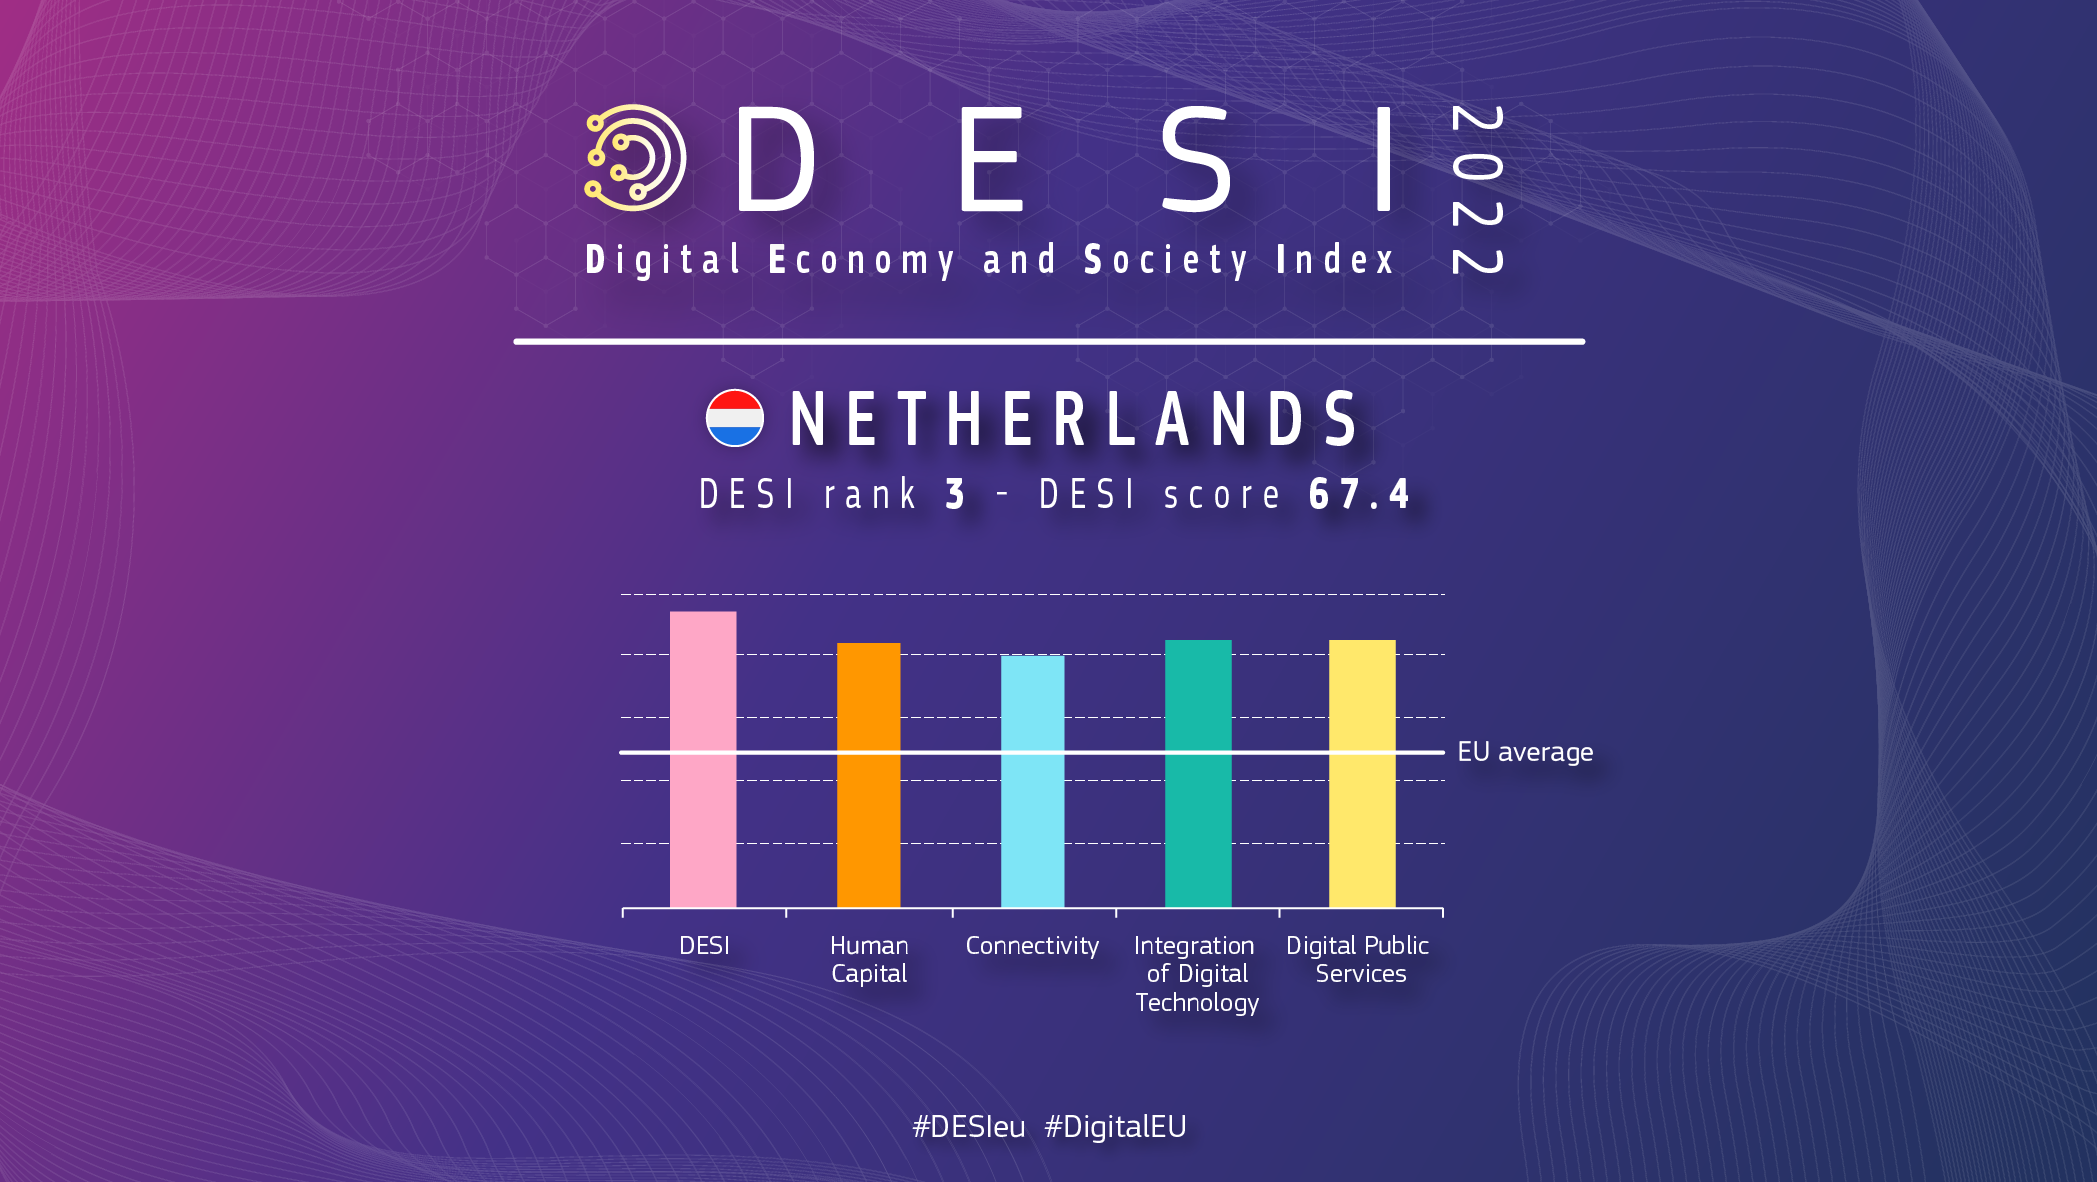 Graphic overview of the Netherlands in DESI showing a ranking of 3 with a score of 67.4